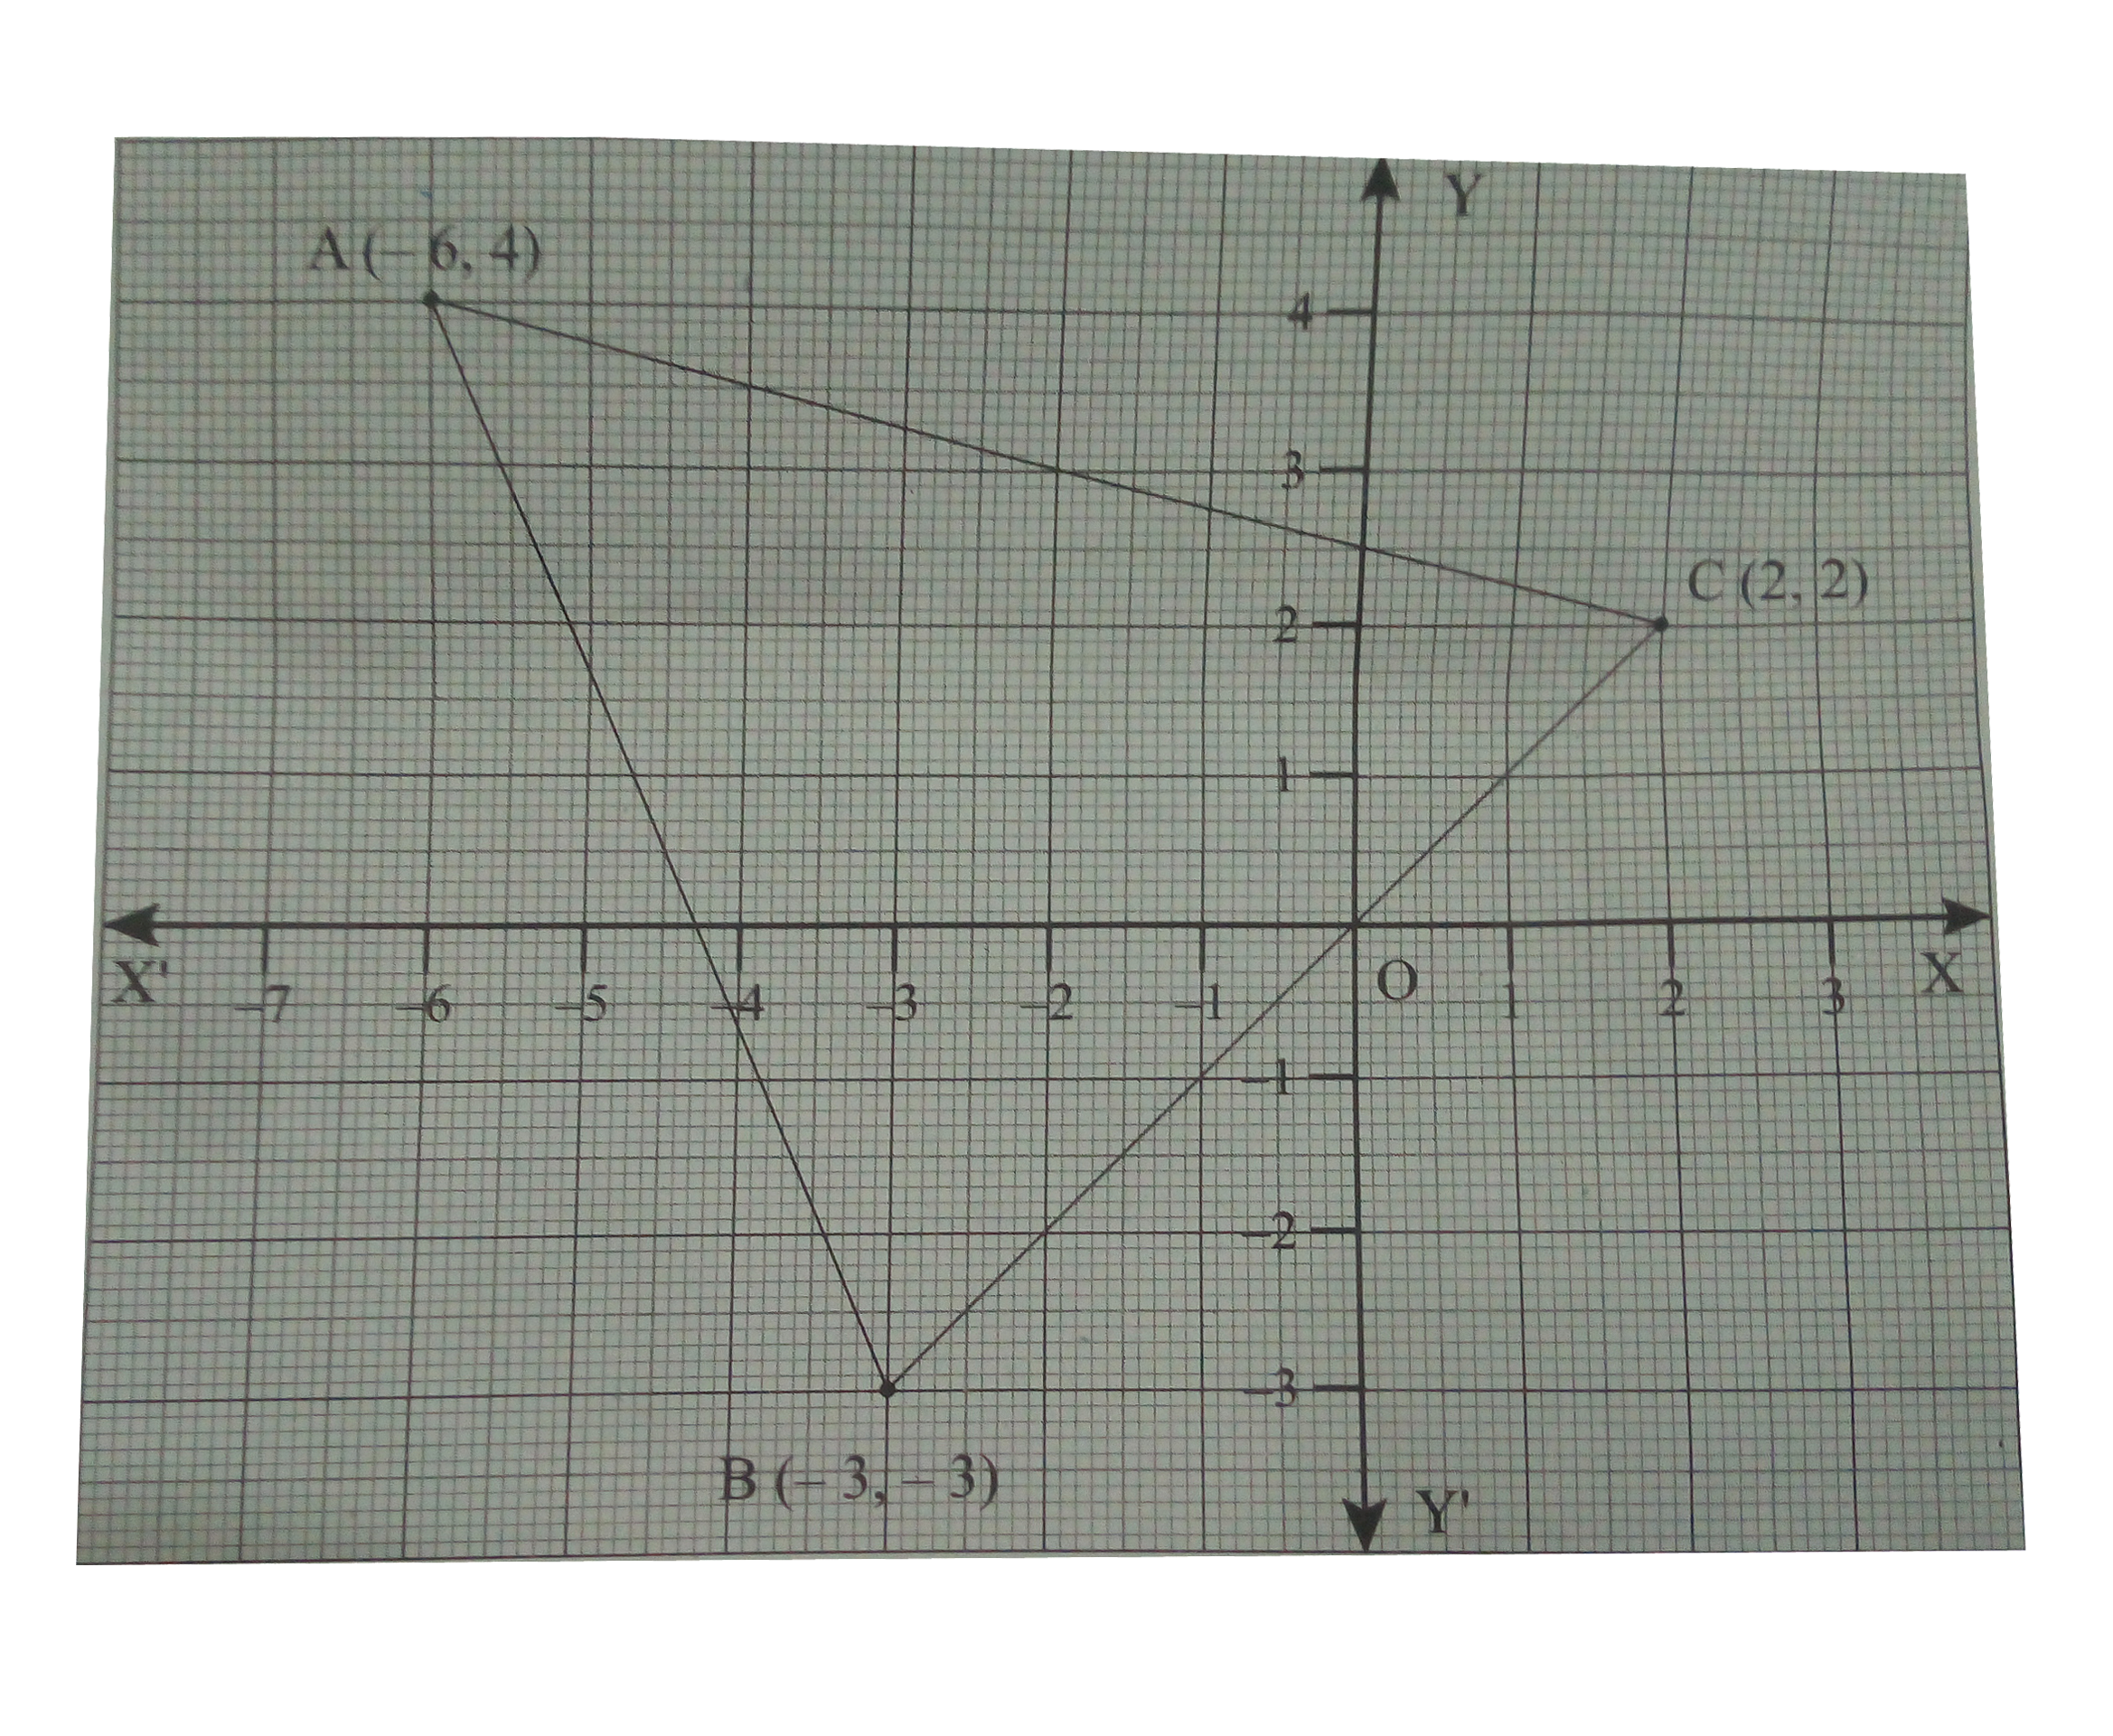 Read the coordinates of the vertices of the triangle ABC with the following figure.